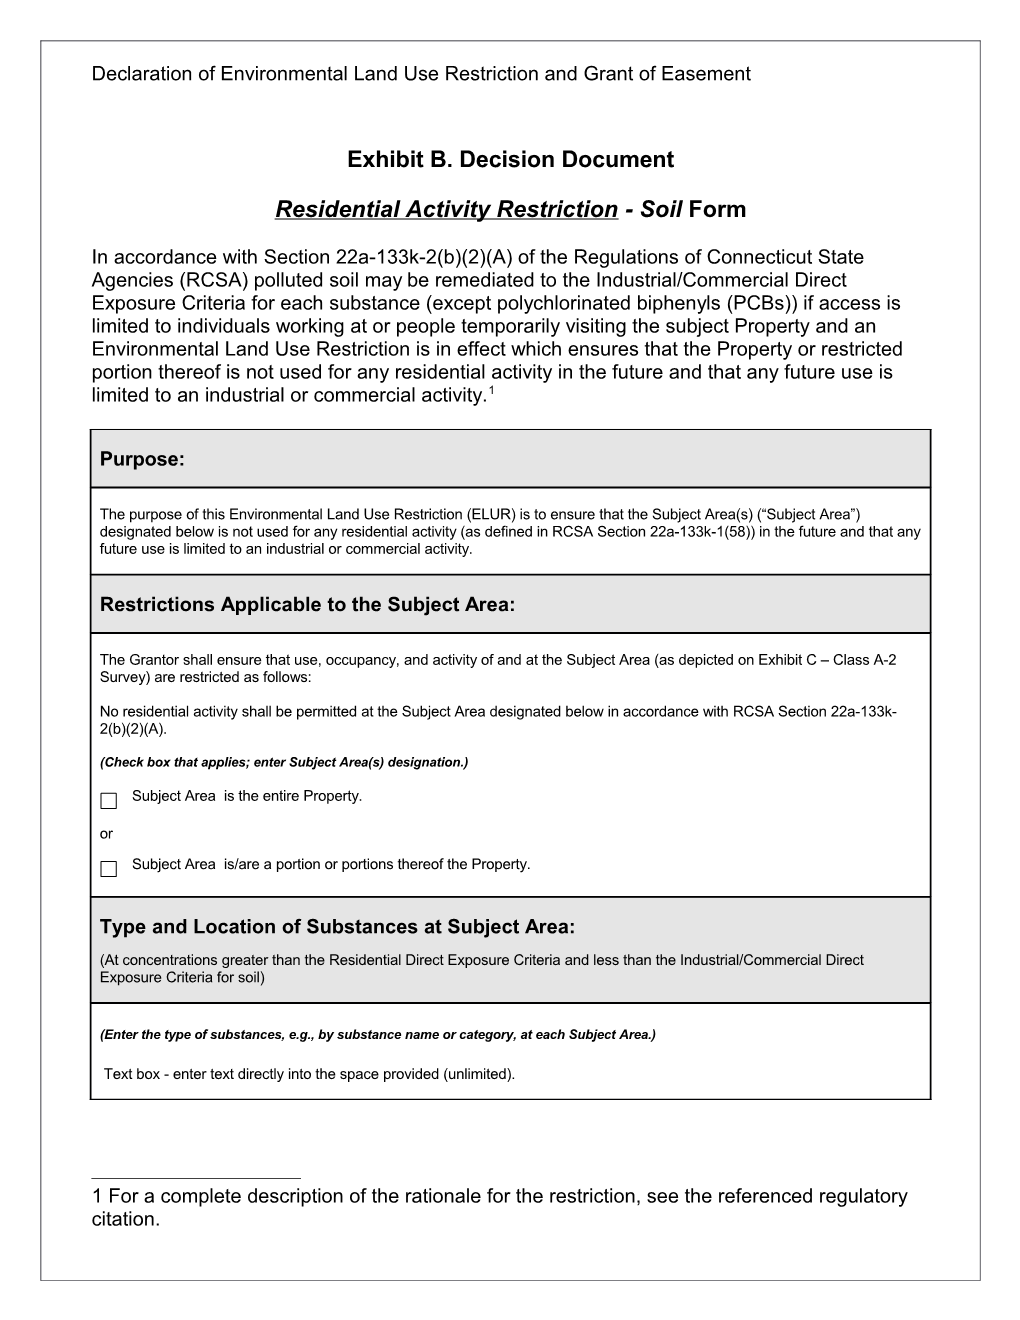 Application Form for Environmental Land Use Restriction